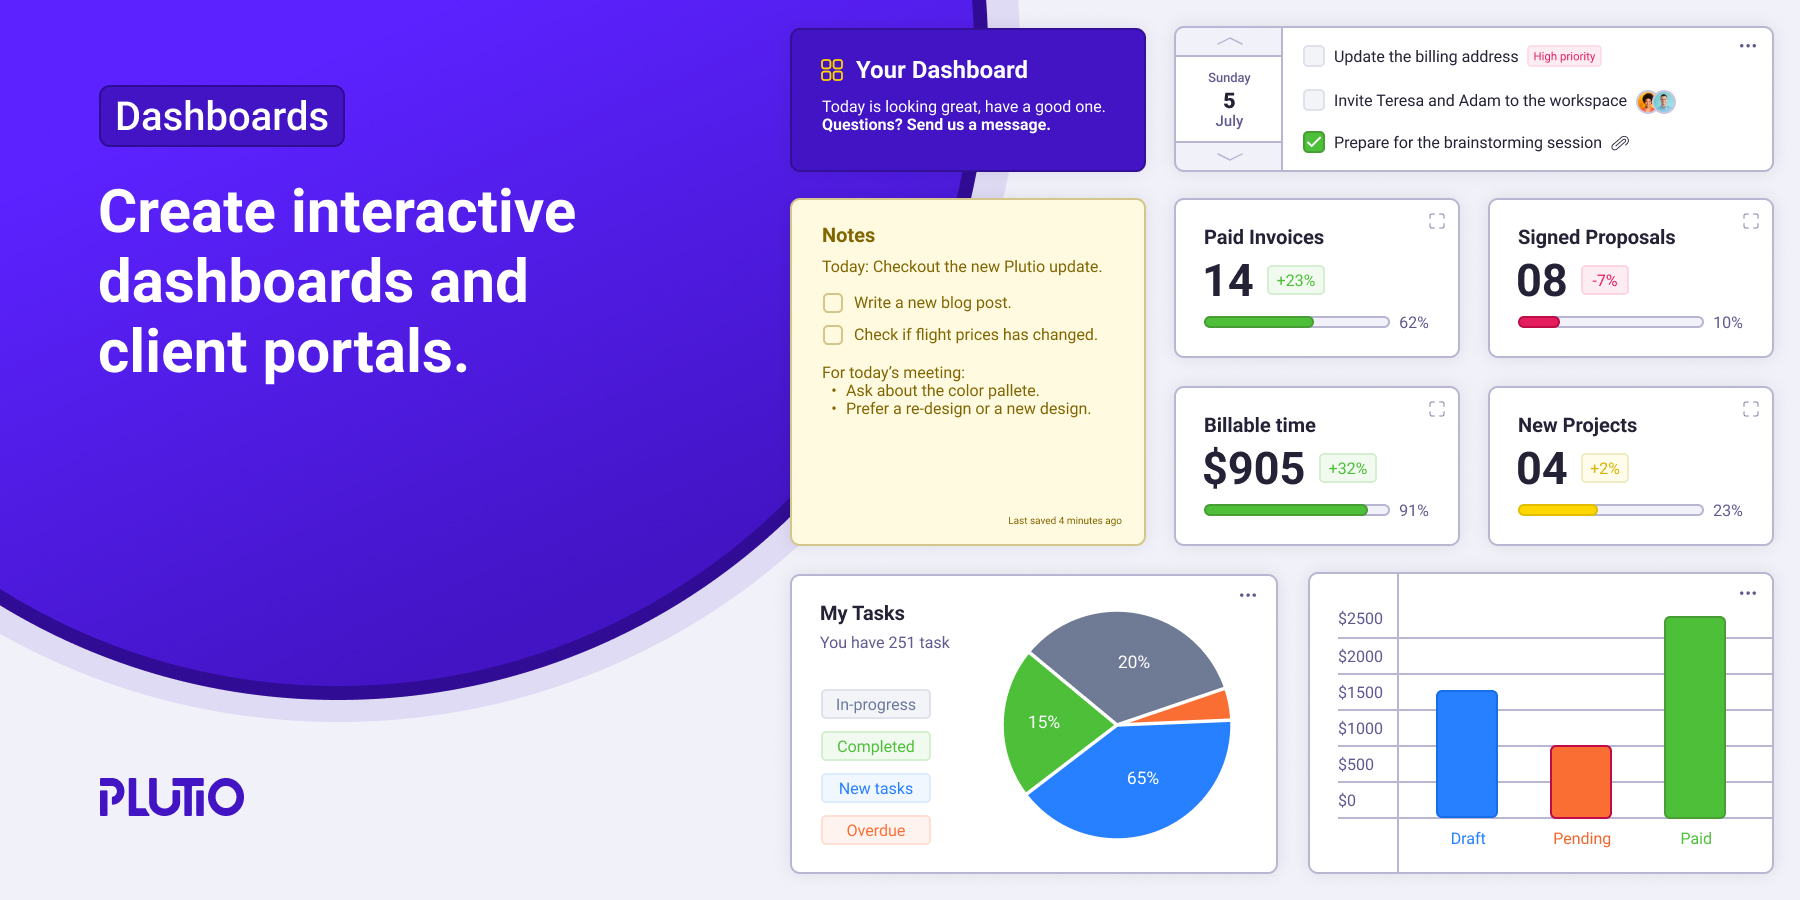 Plutio brand asset - dashboards and client portal